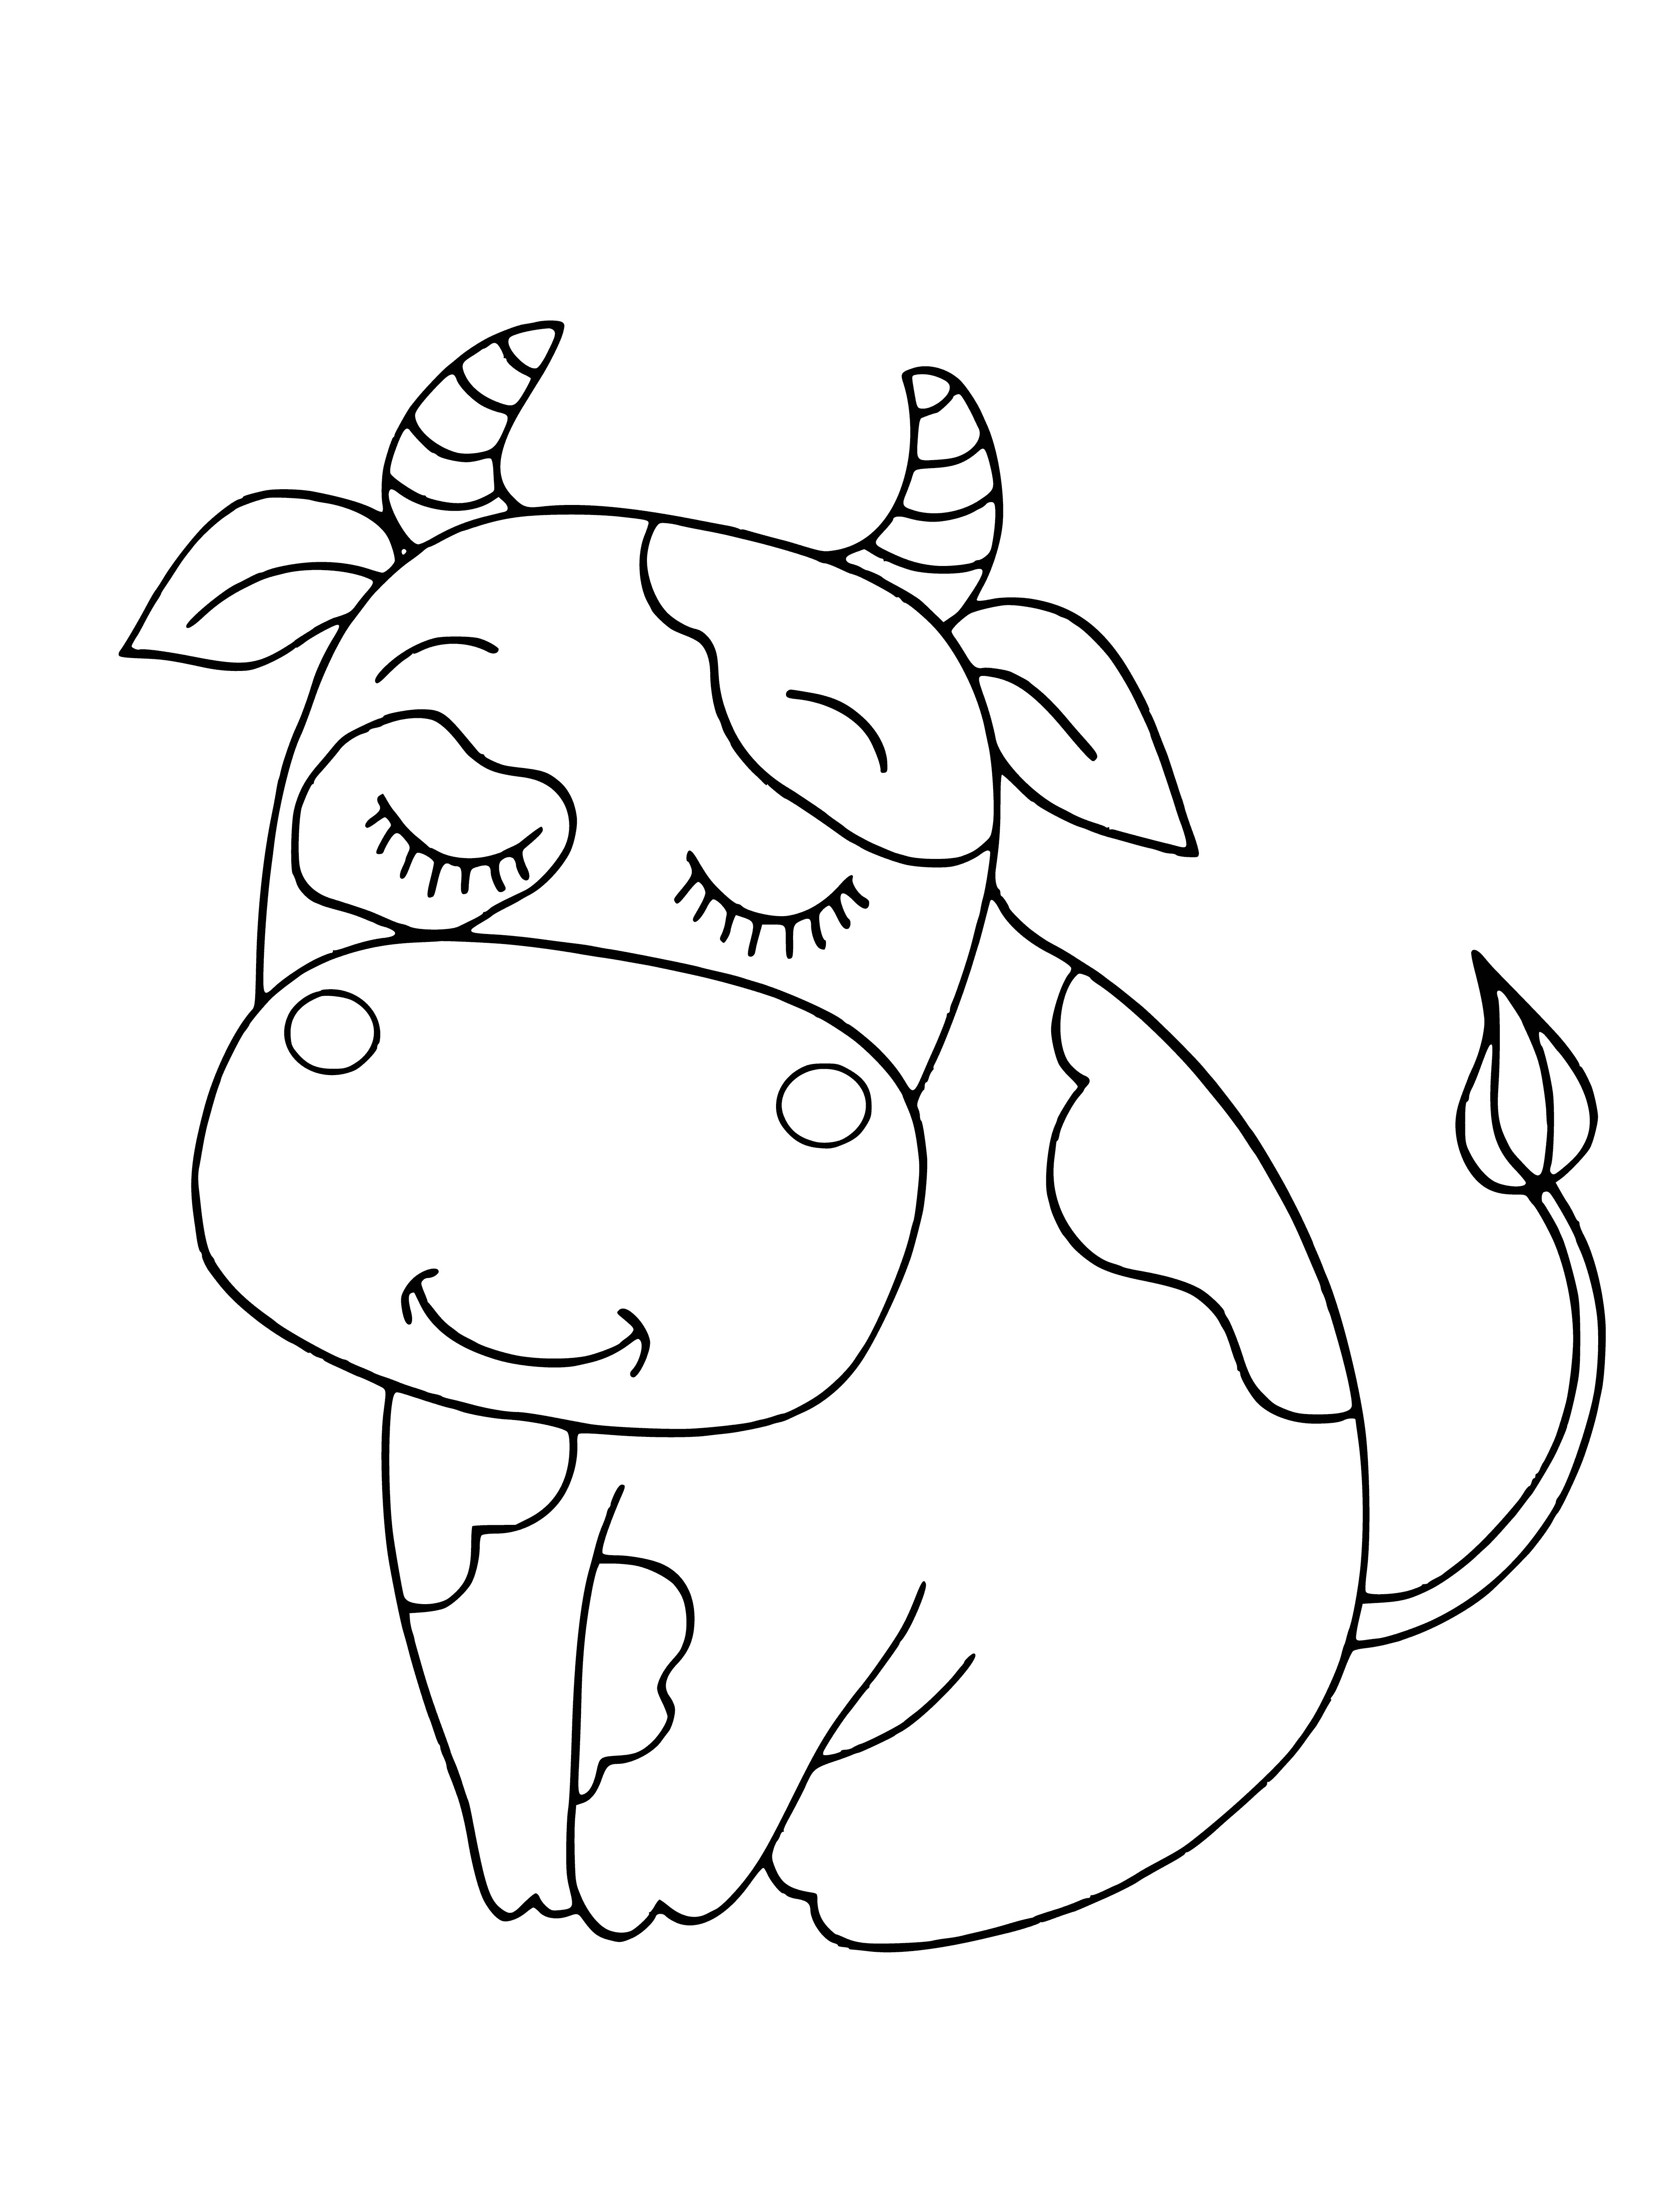 coloring page: Bulls symbolize strength, power and luck; they are large, muscular animals known for their strength and power.